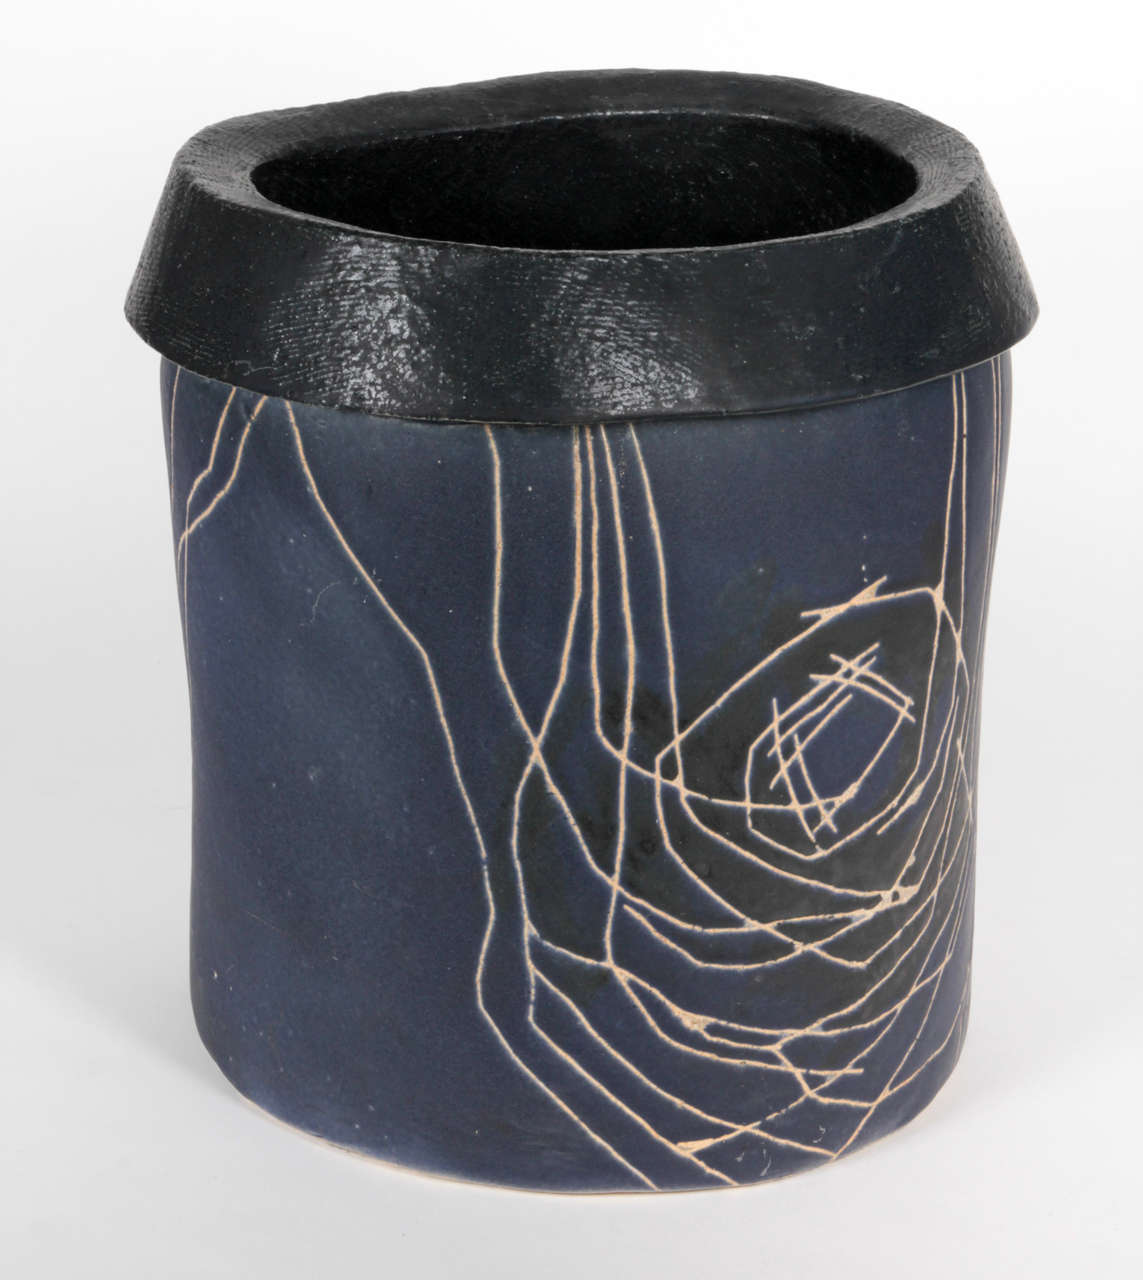 LUKE LIETZKE (1906-2000), USA
LIETZKE DESIGNS   Mogodore, Ohio

Large floor vessel c. 1955-1960

Blue glazed stoneware cylindrical vessel which has been shaped at the top into an elliptical form; the black glazed lip is rolled over with a